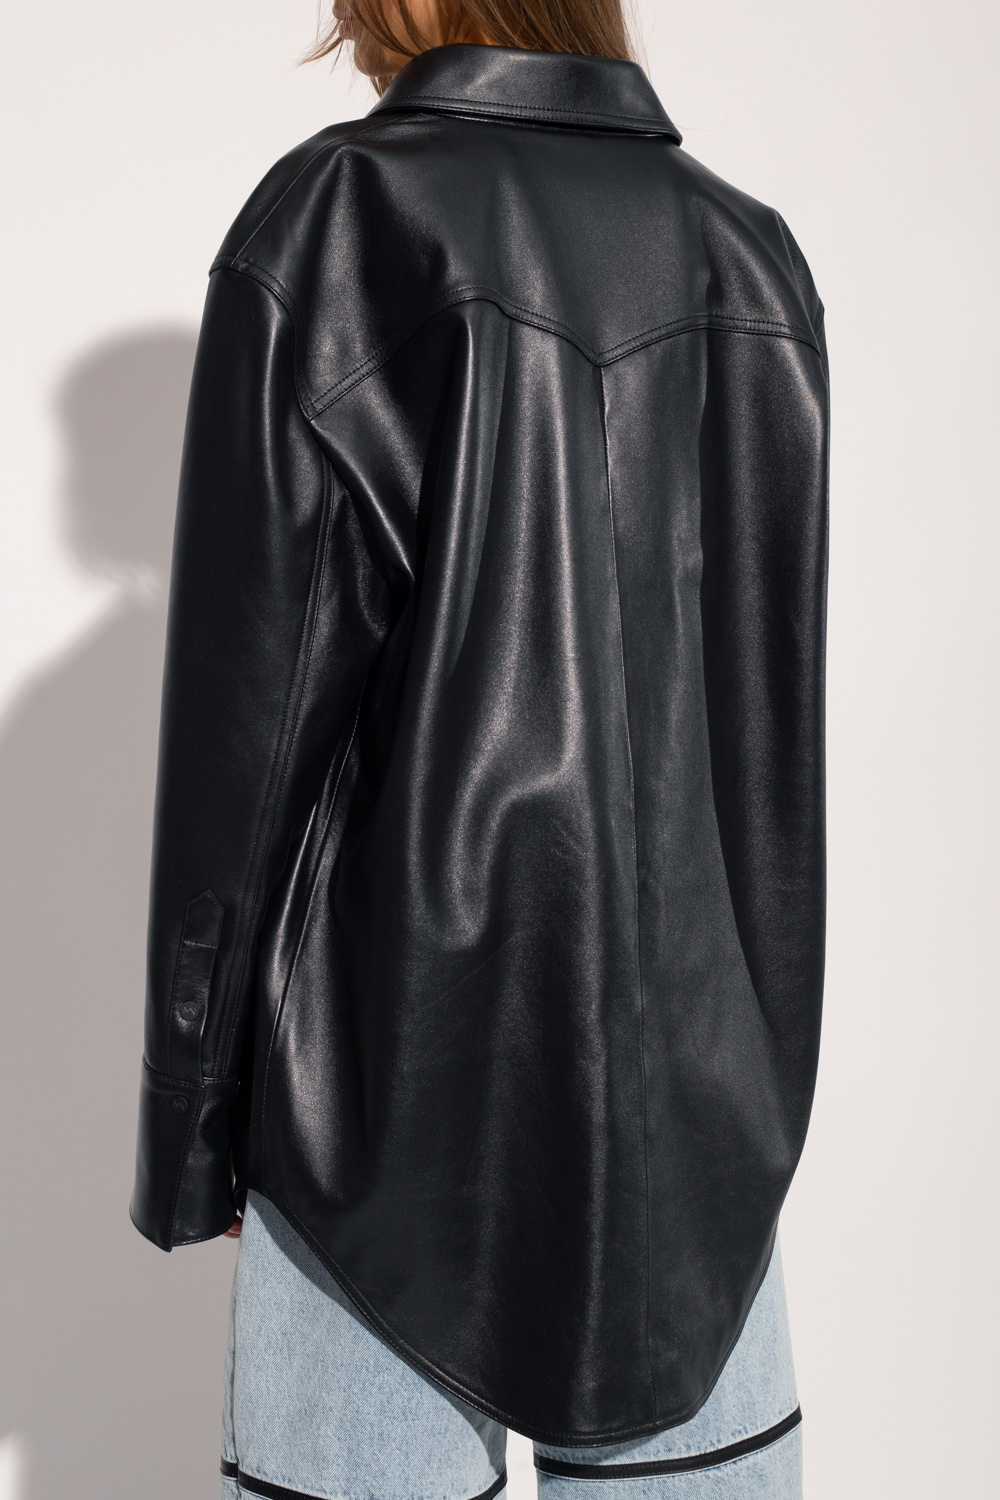 The Mannei ‘Patras’ oversize leather shirt